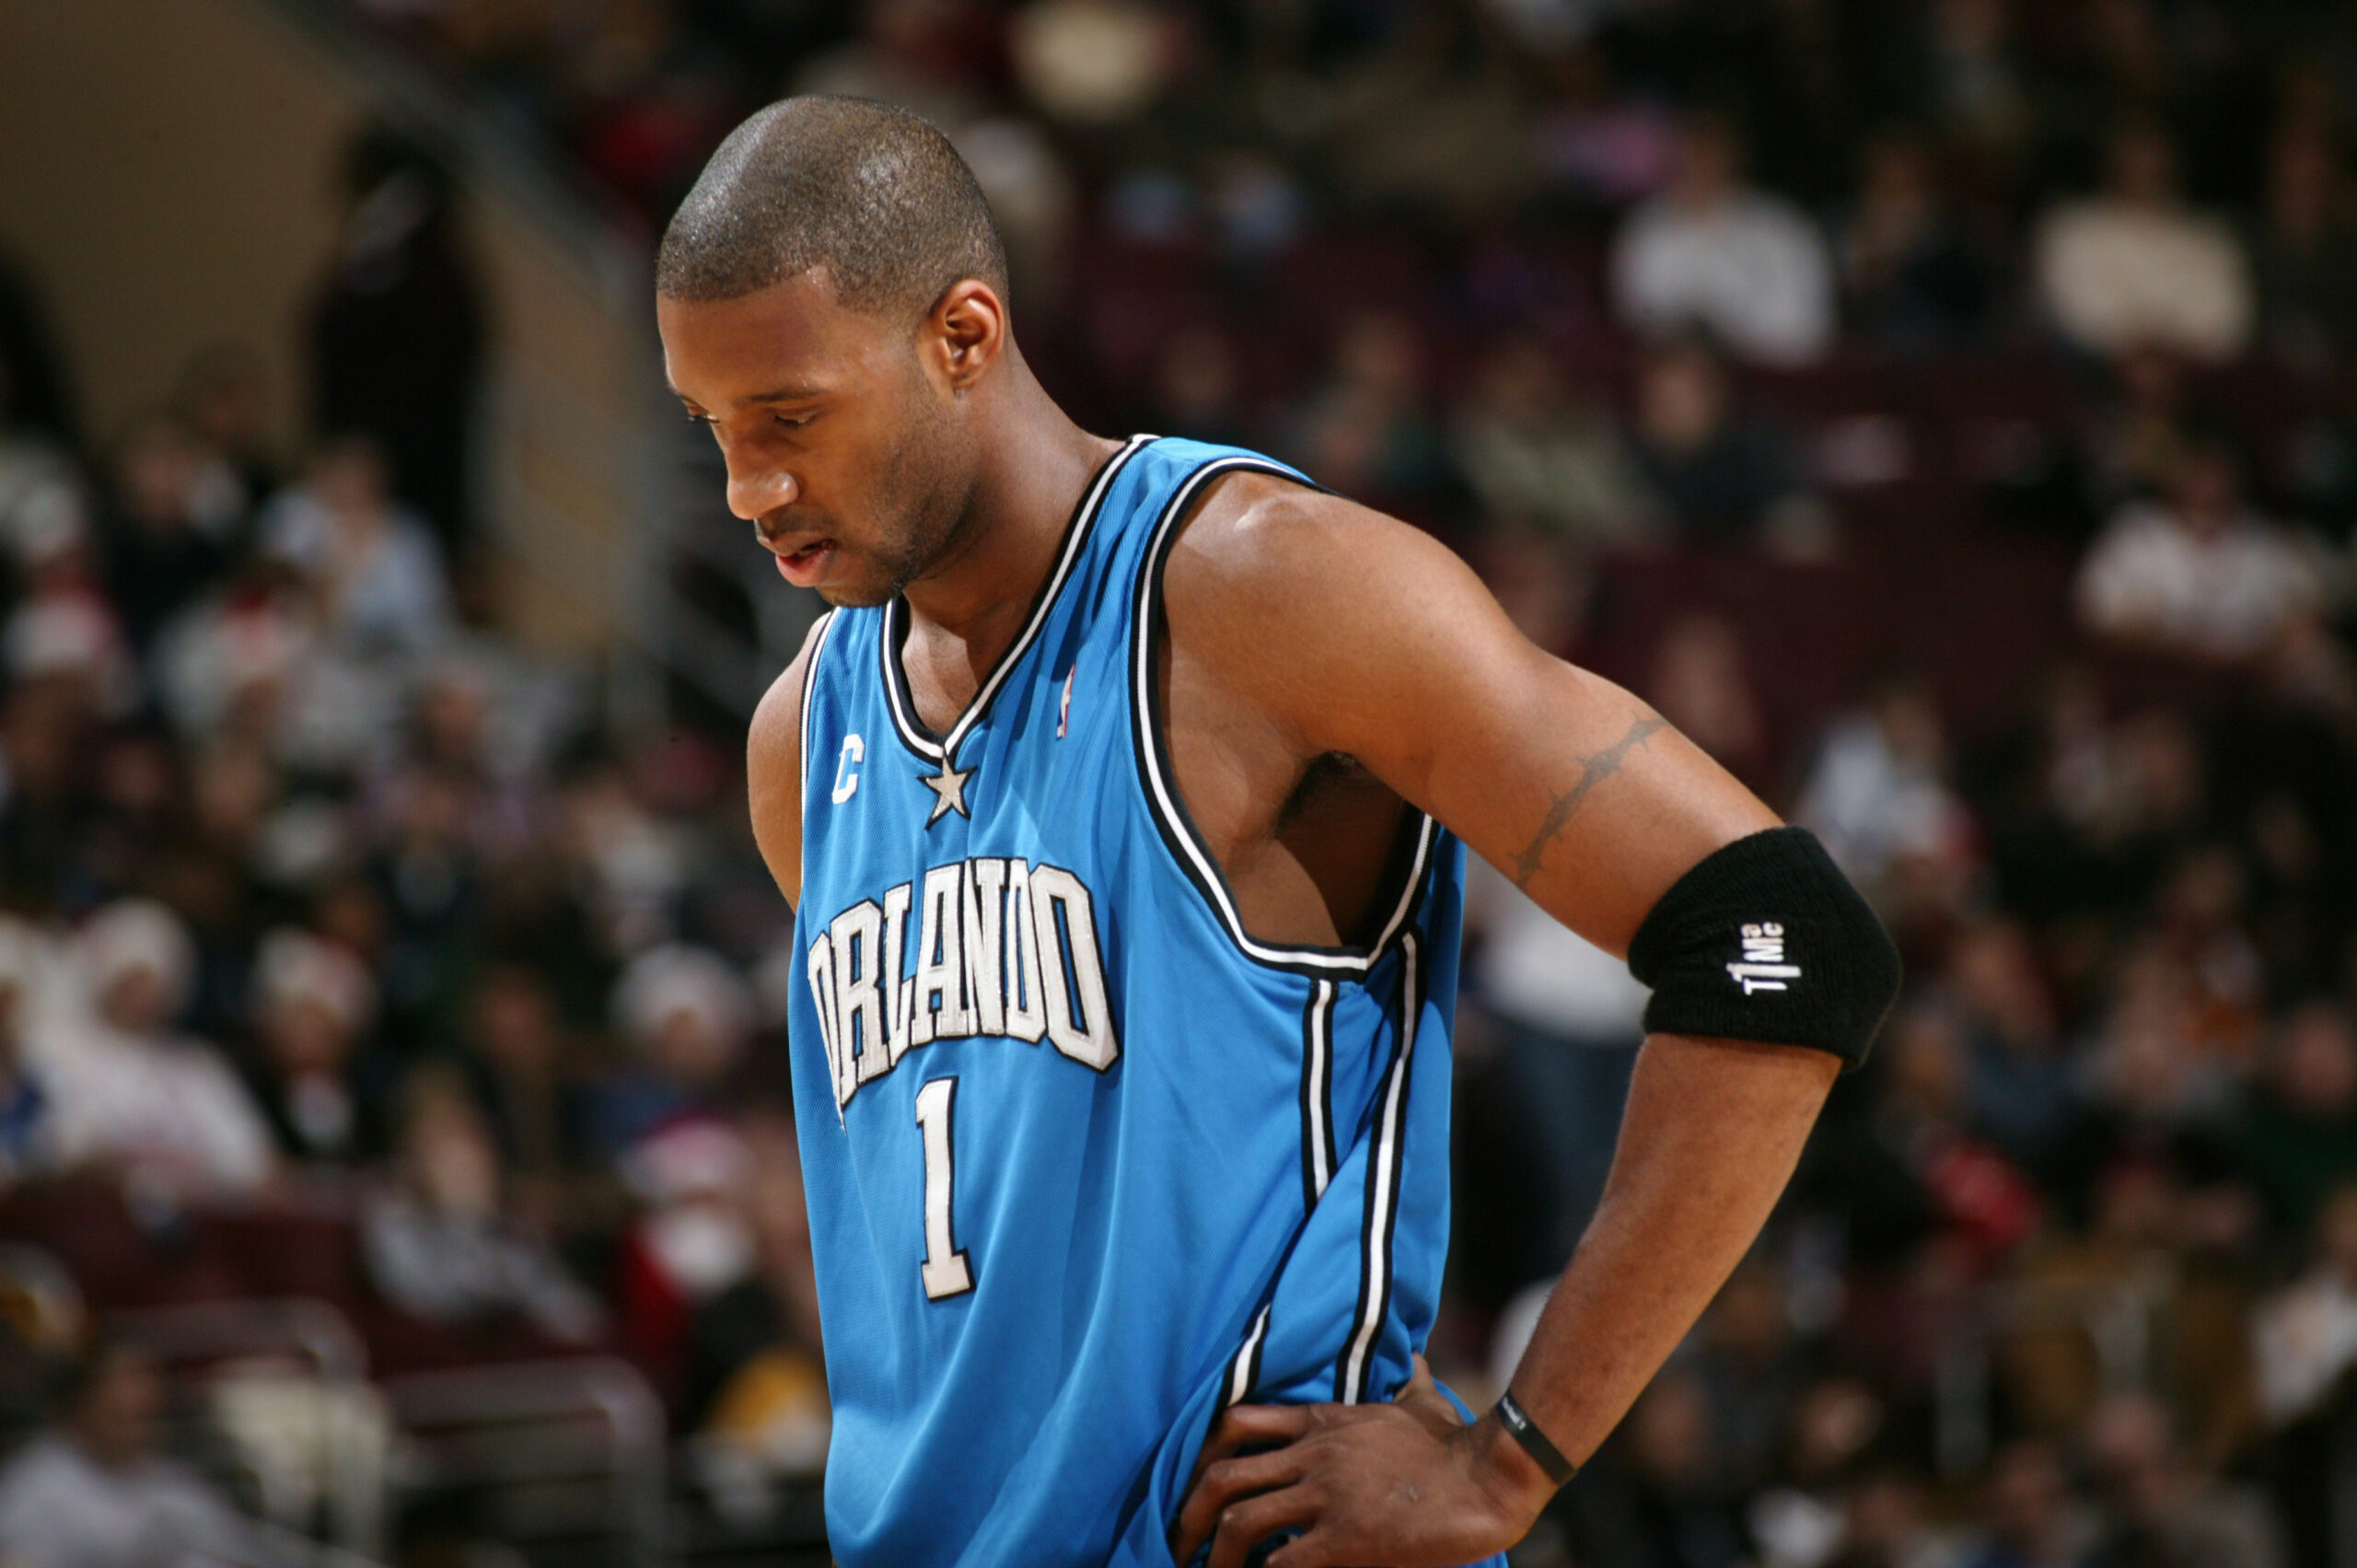 How rich is Tracy Mcgrady?